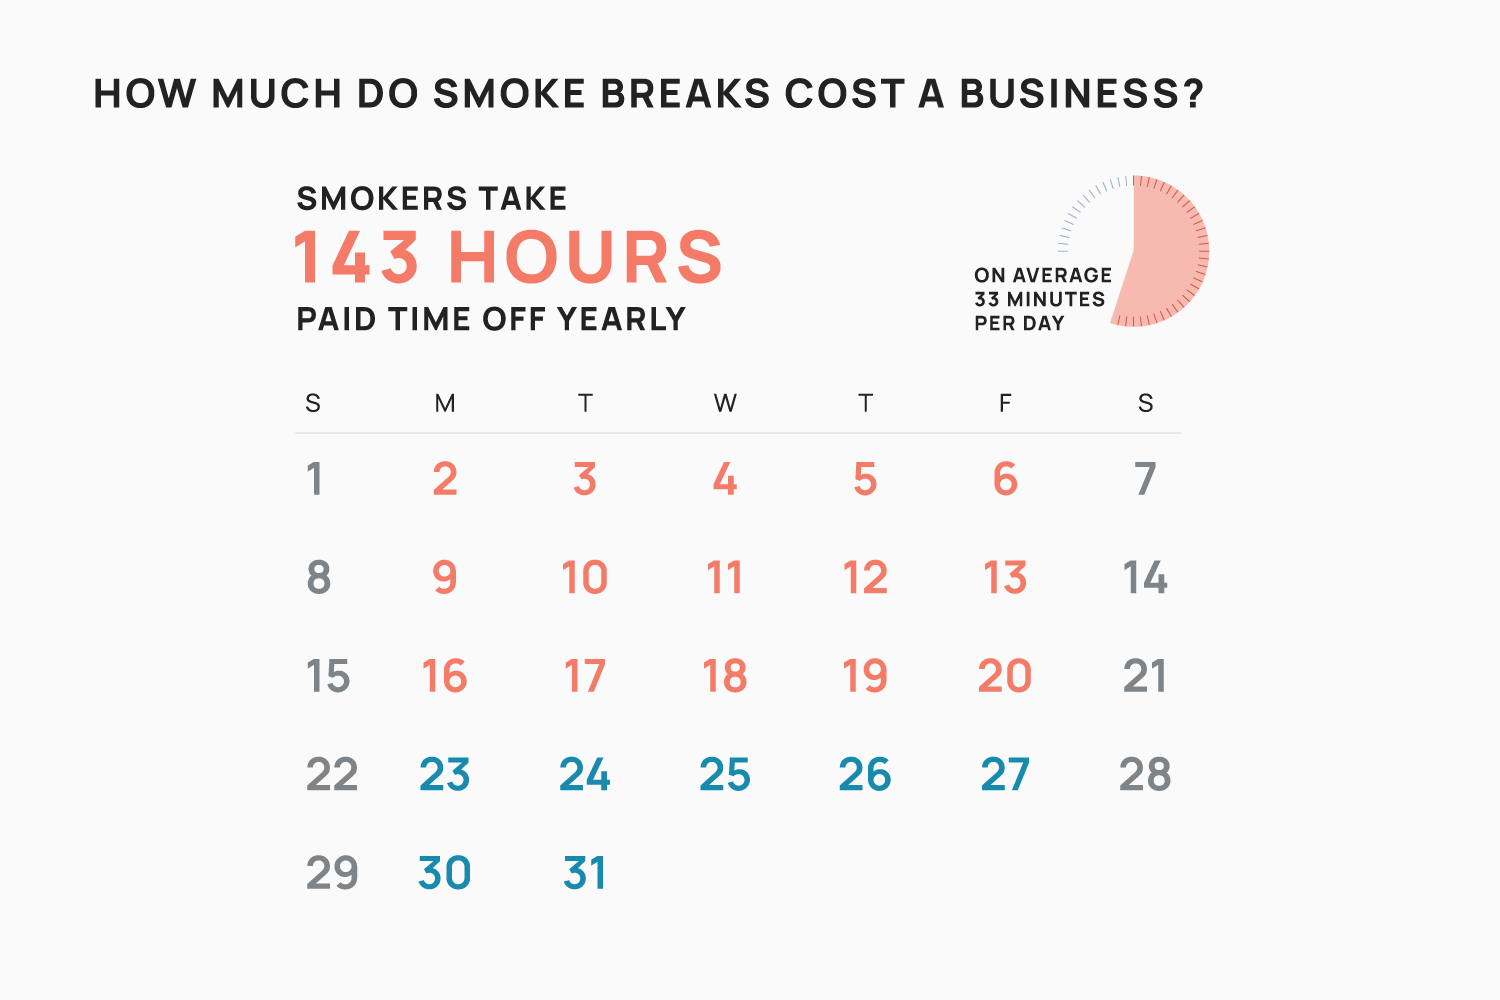 Graph 2: How much do smoke breaks cost a business?